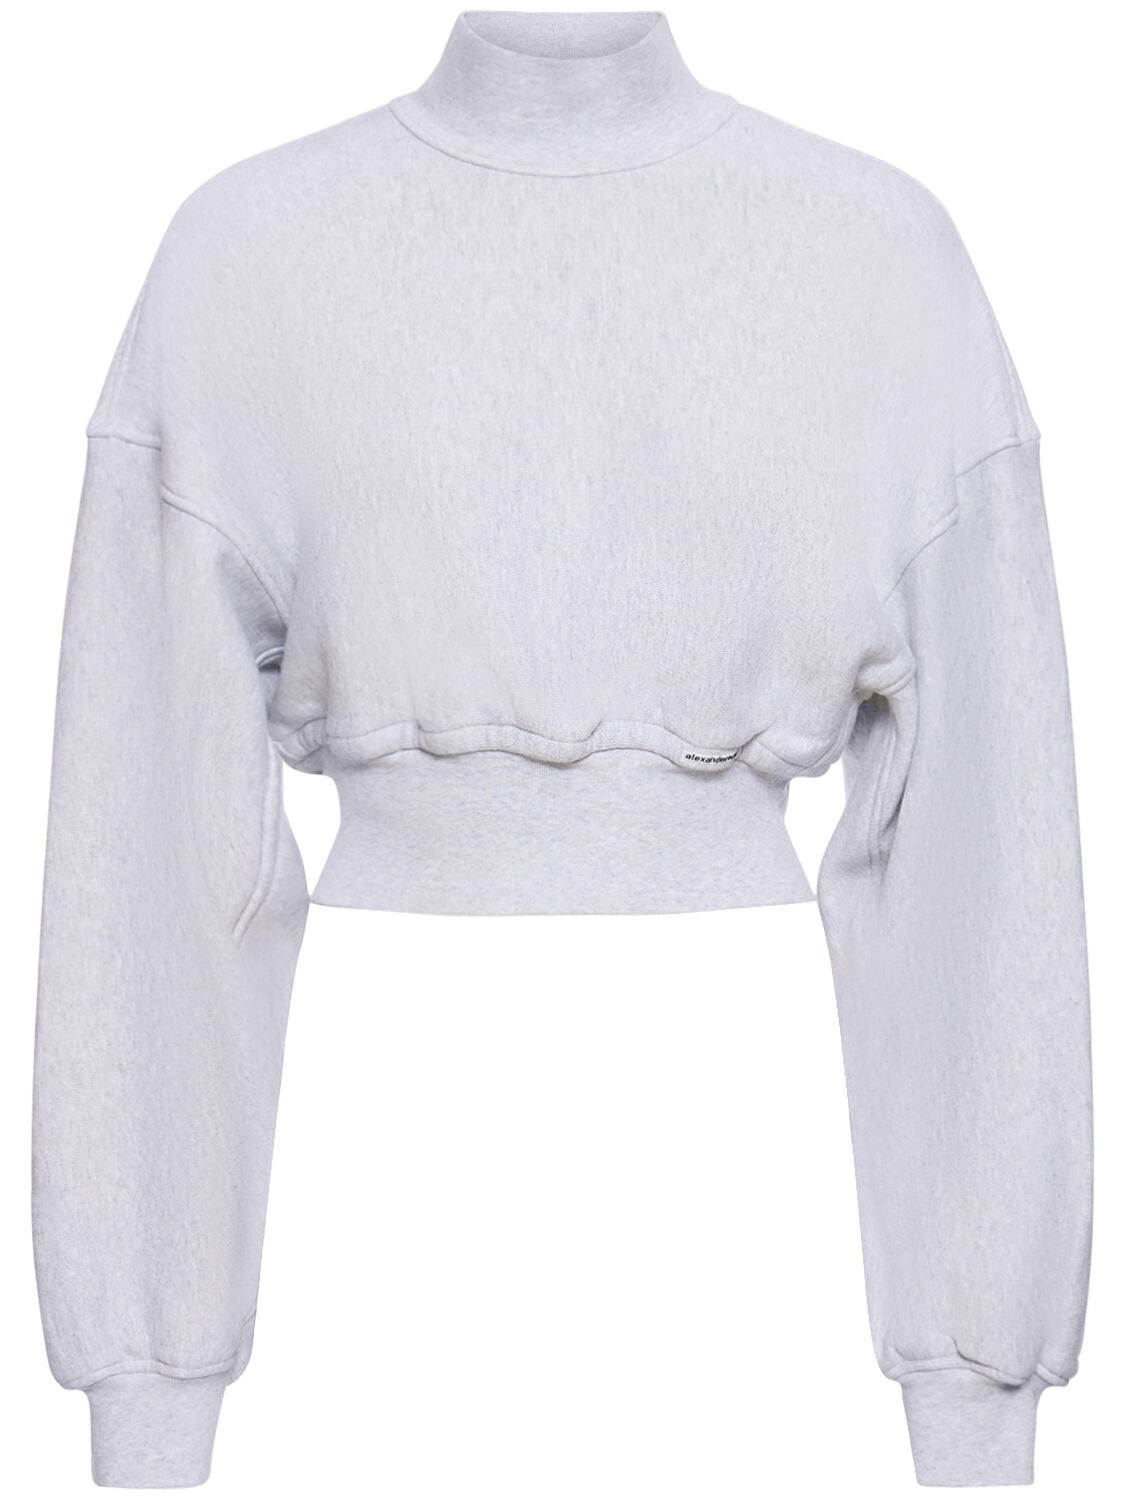 Image of Cropped Cotton Turtleneck Sweater